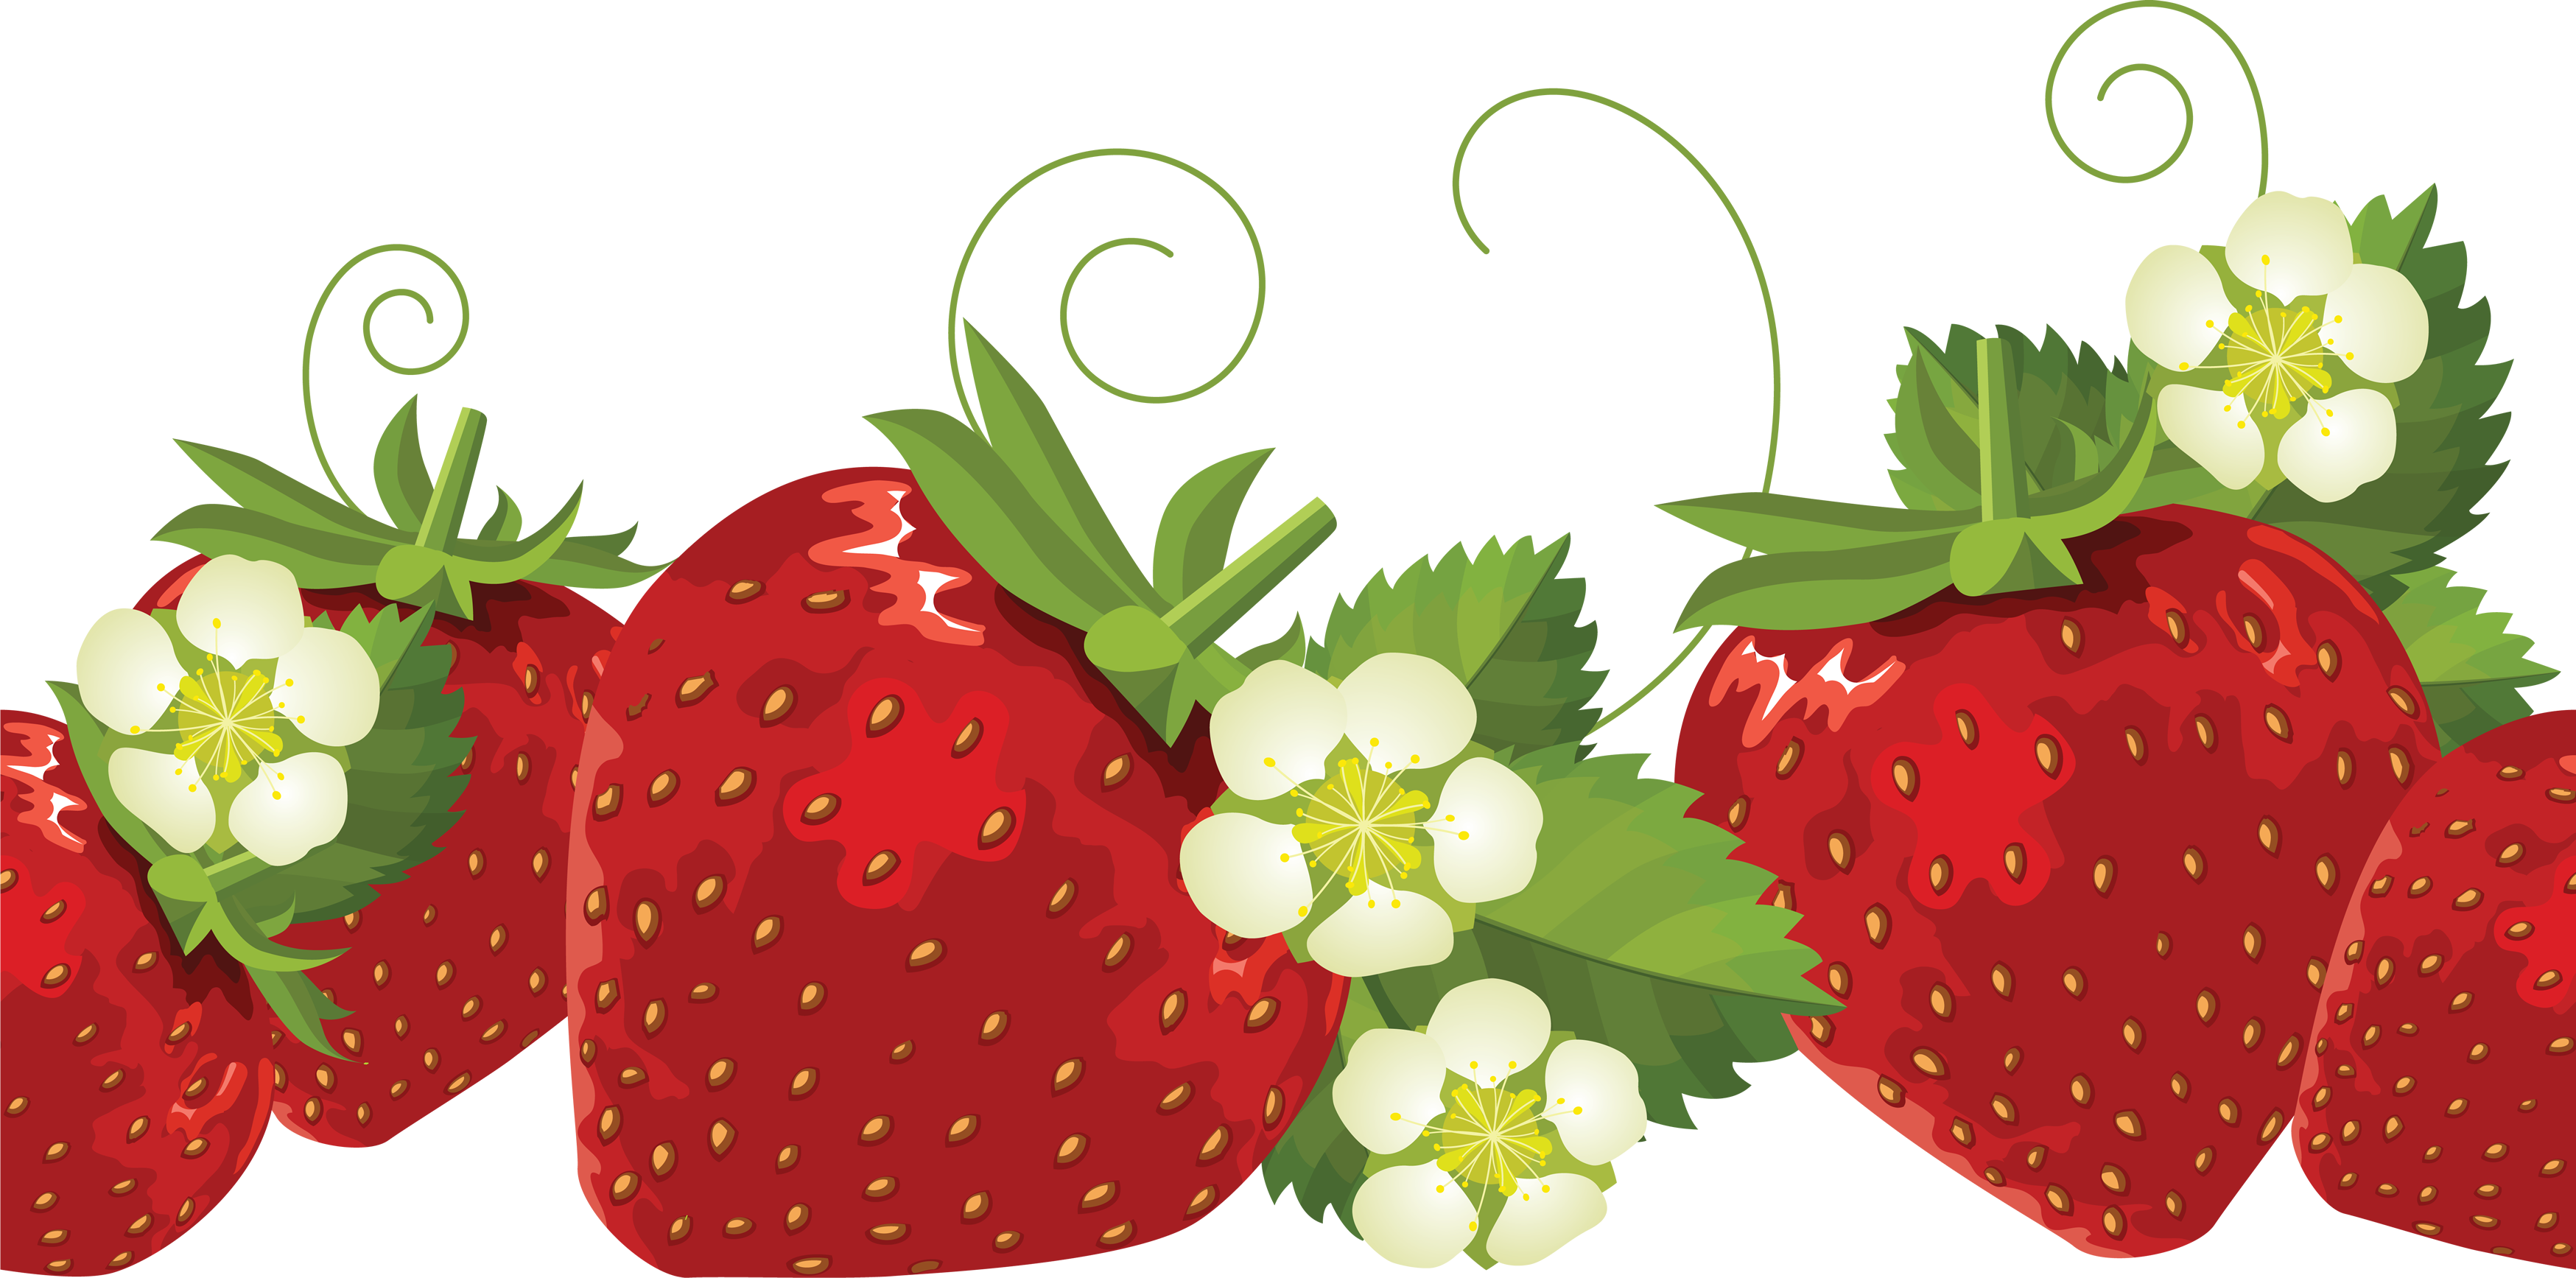 Strawberry PNG images Download